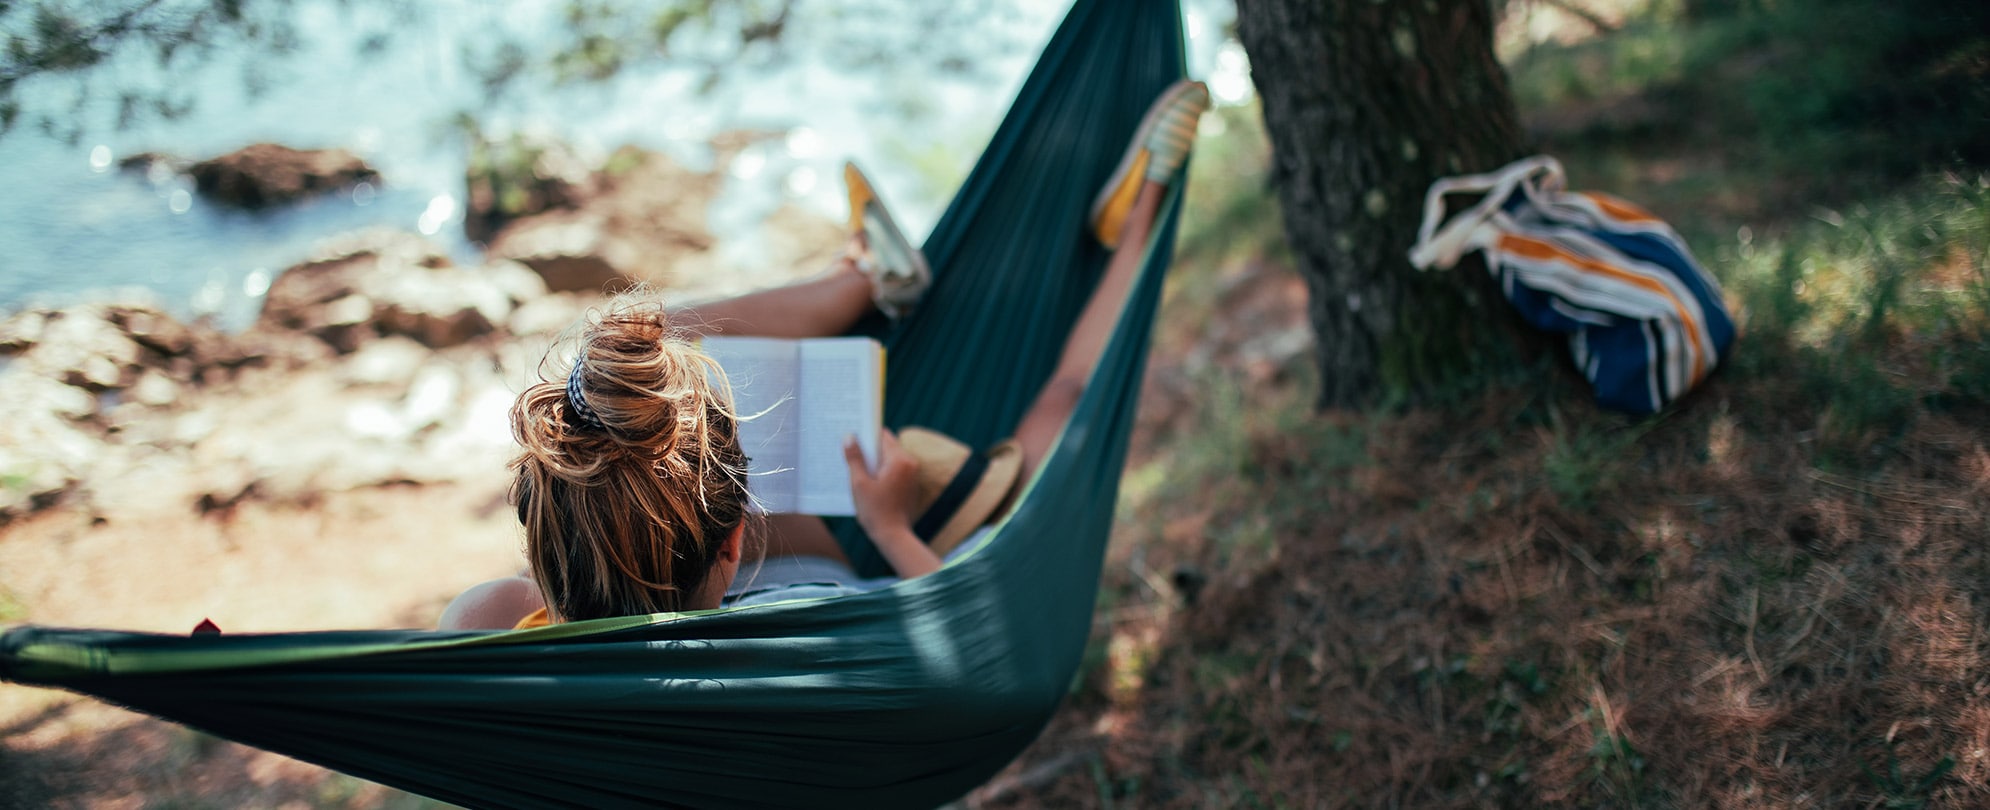 View from behind as a woman reads a book while lounging in a hammock next to a stream.